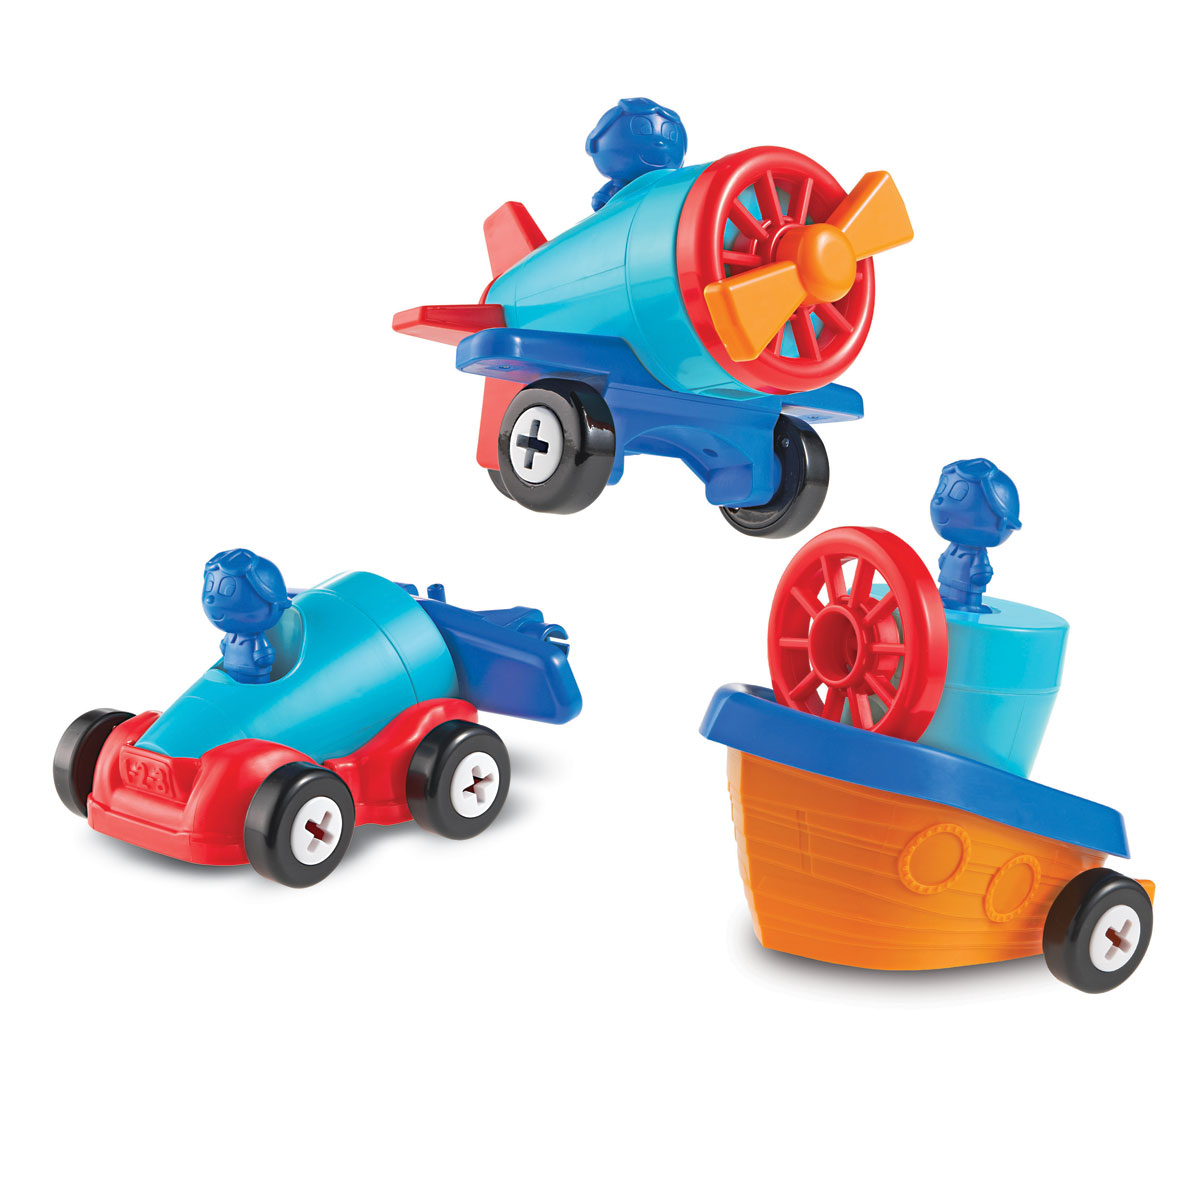 1 2 3 build it car, plane & boat set - from learning